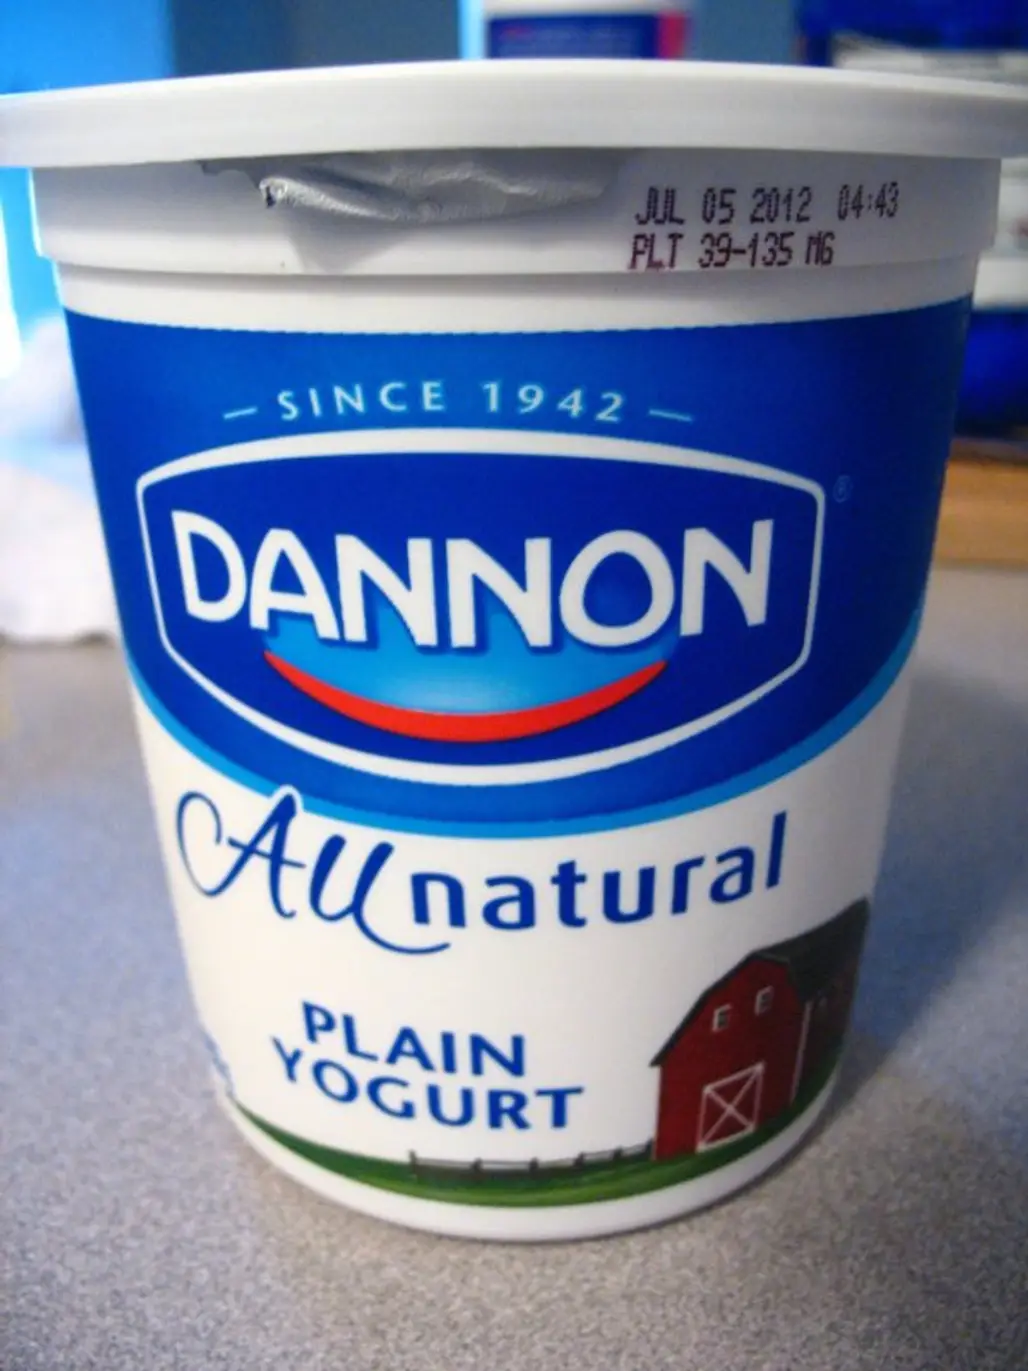 Dannon,food,dairy product,product,breakfast,